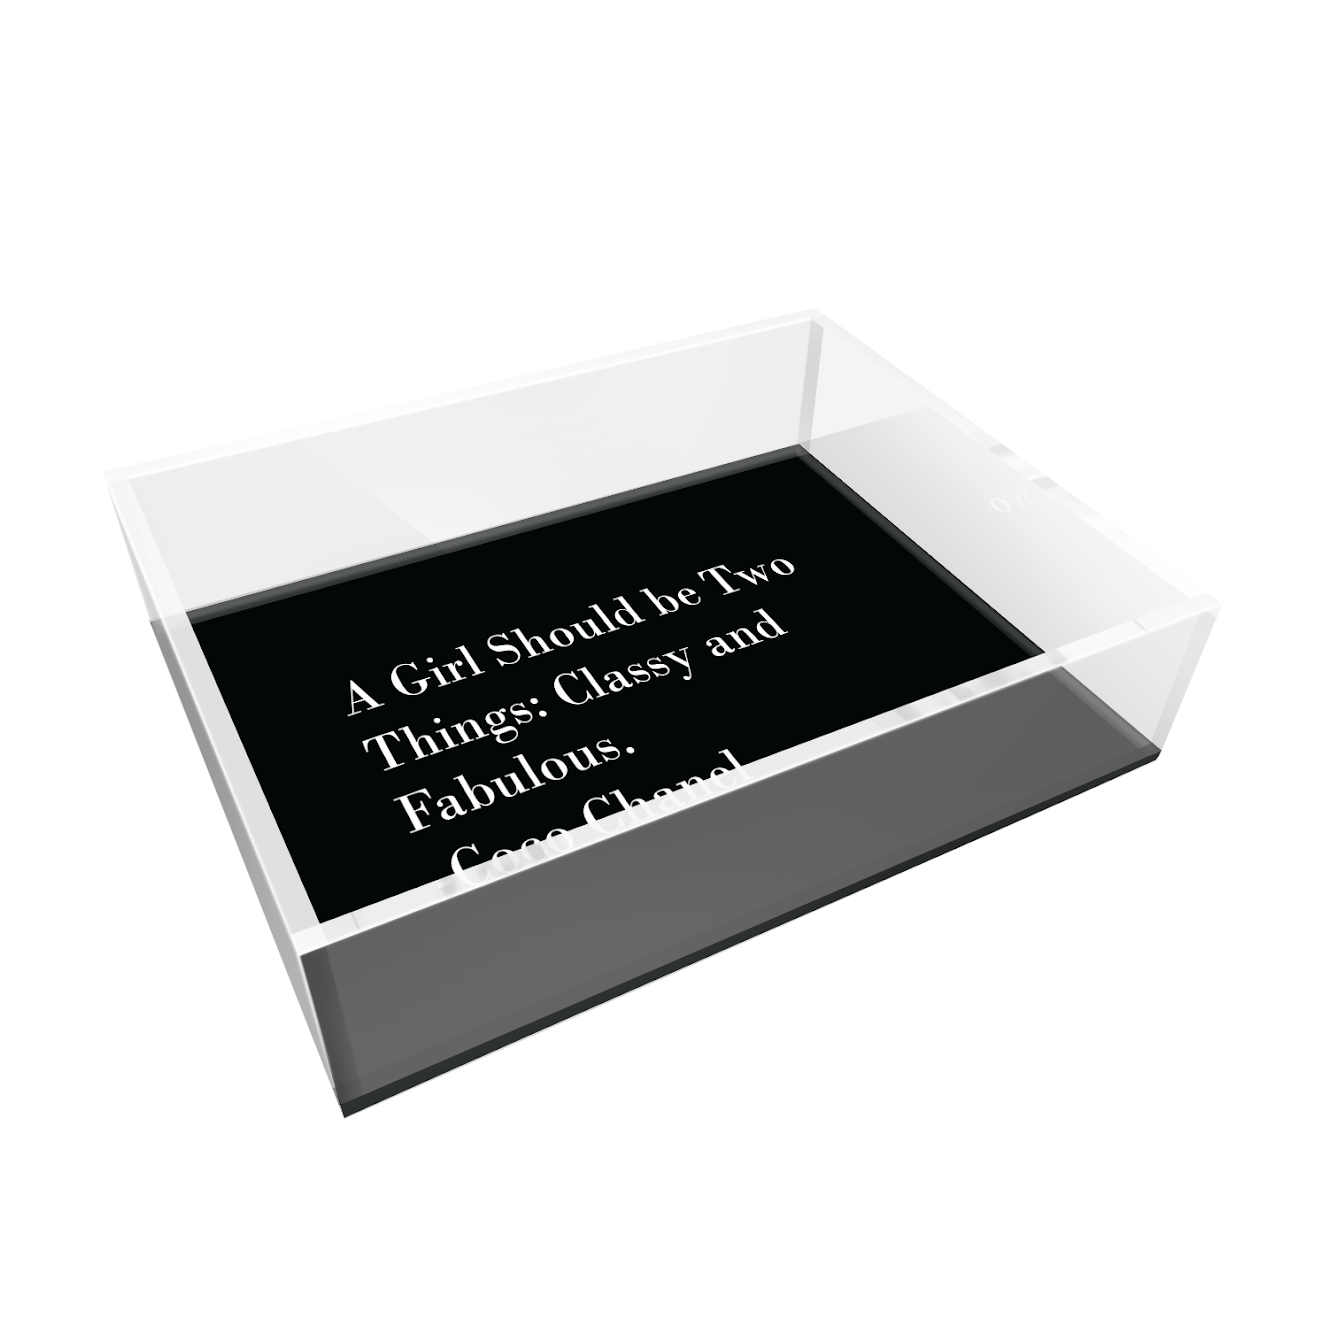 A GIRL SHOULD BE TWO THINGS ACRYLIC TRAY